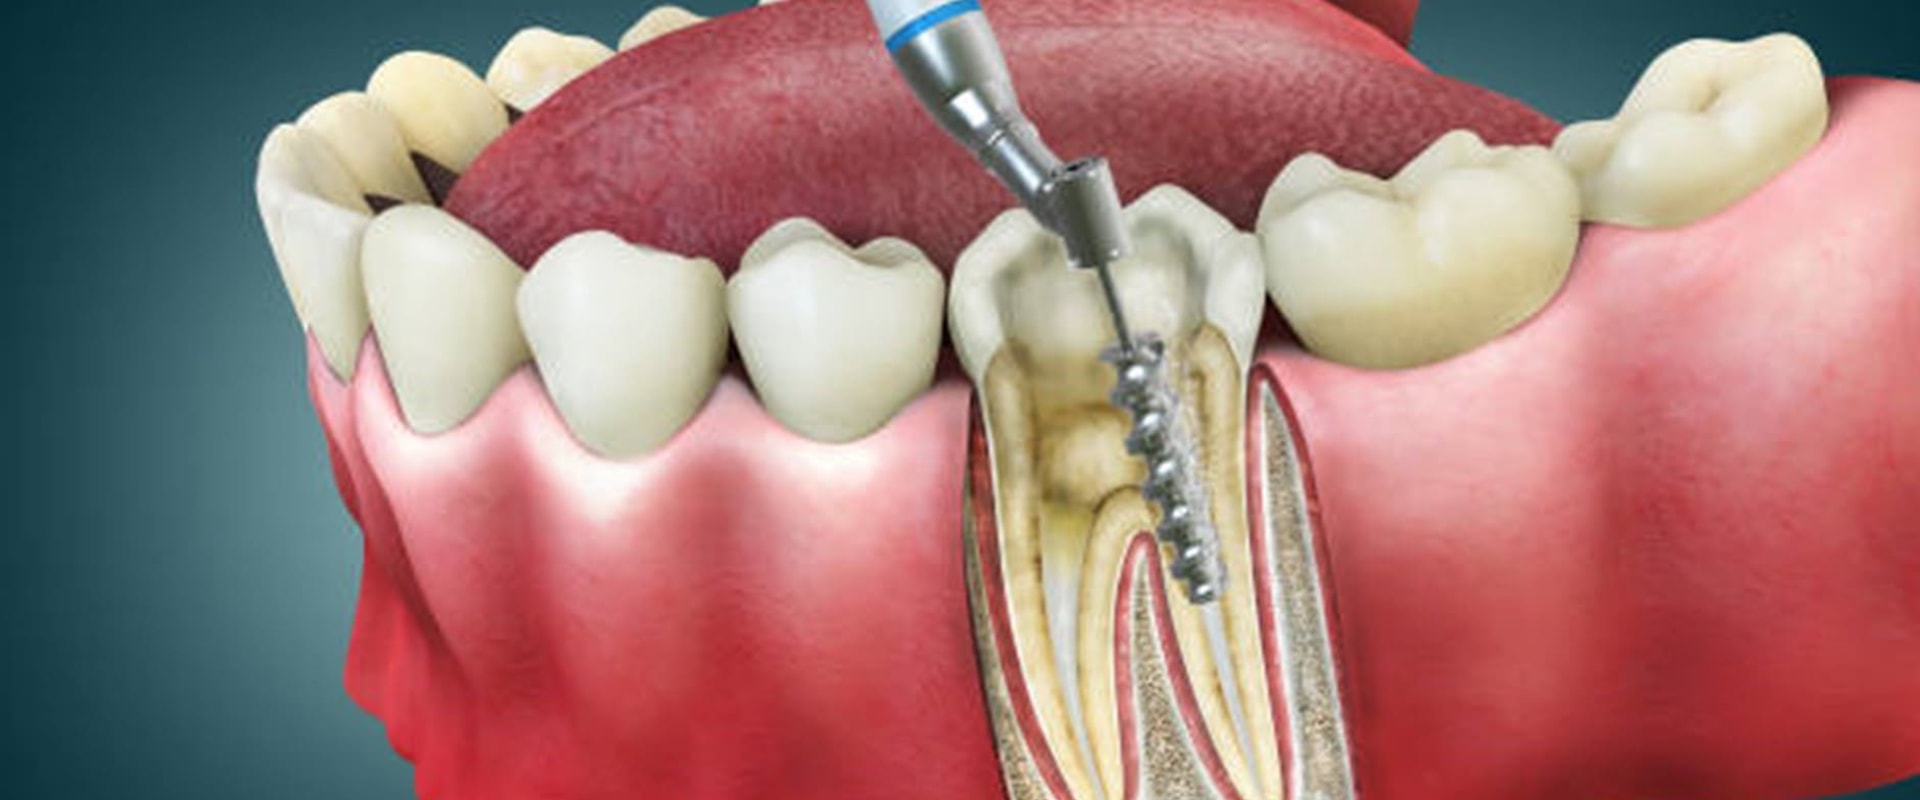 Aftercare for a Root Canal: Tips and Information for Affordable Dental Insurance Coverage